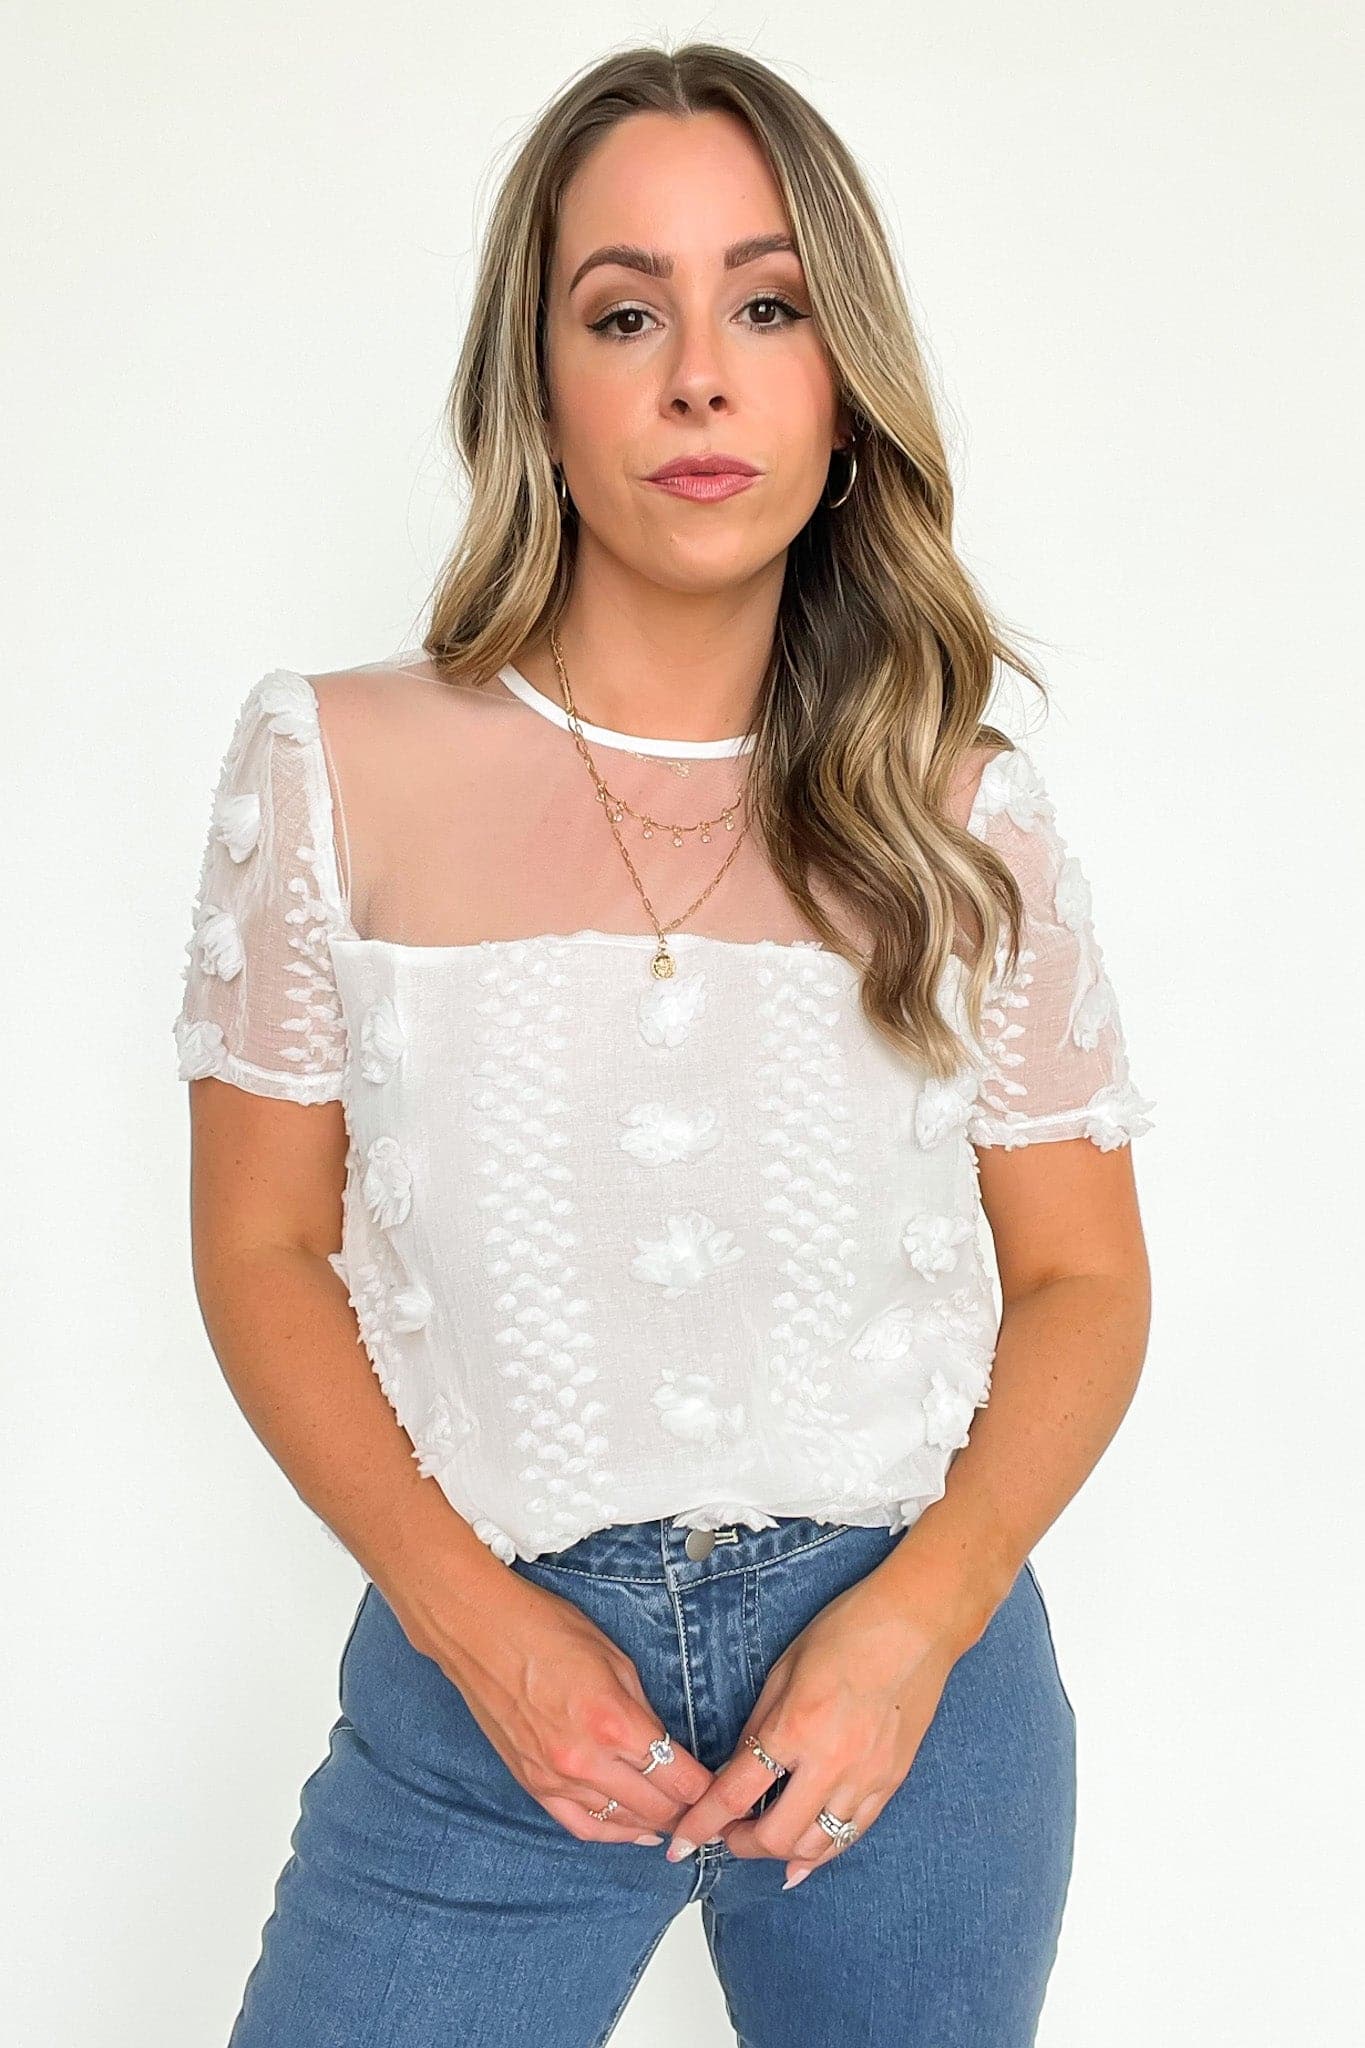  Idyllic Perfection Sheer Pom Pom Detail Top - FINAL SALE - Madison and Mallory